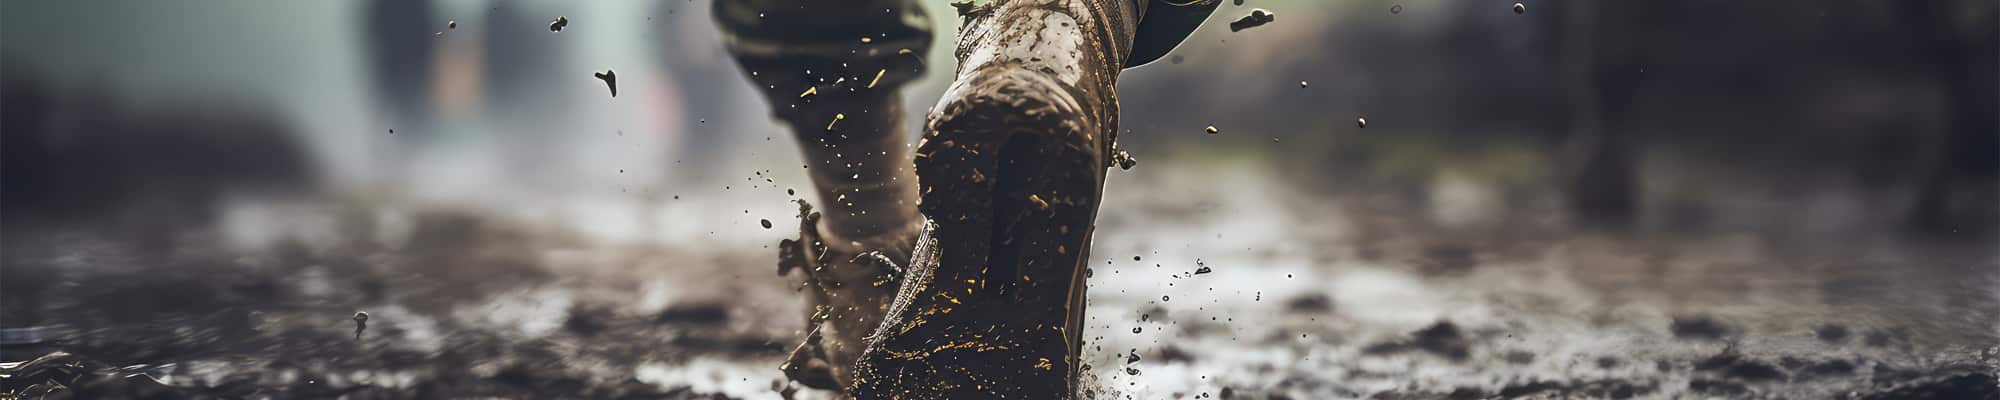 A soldier's boots walking through mud